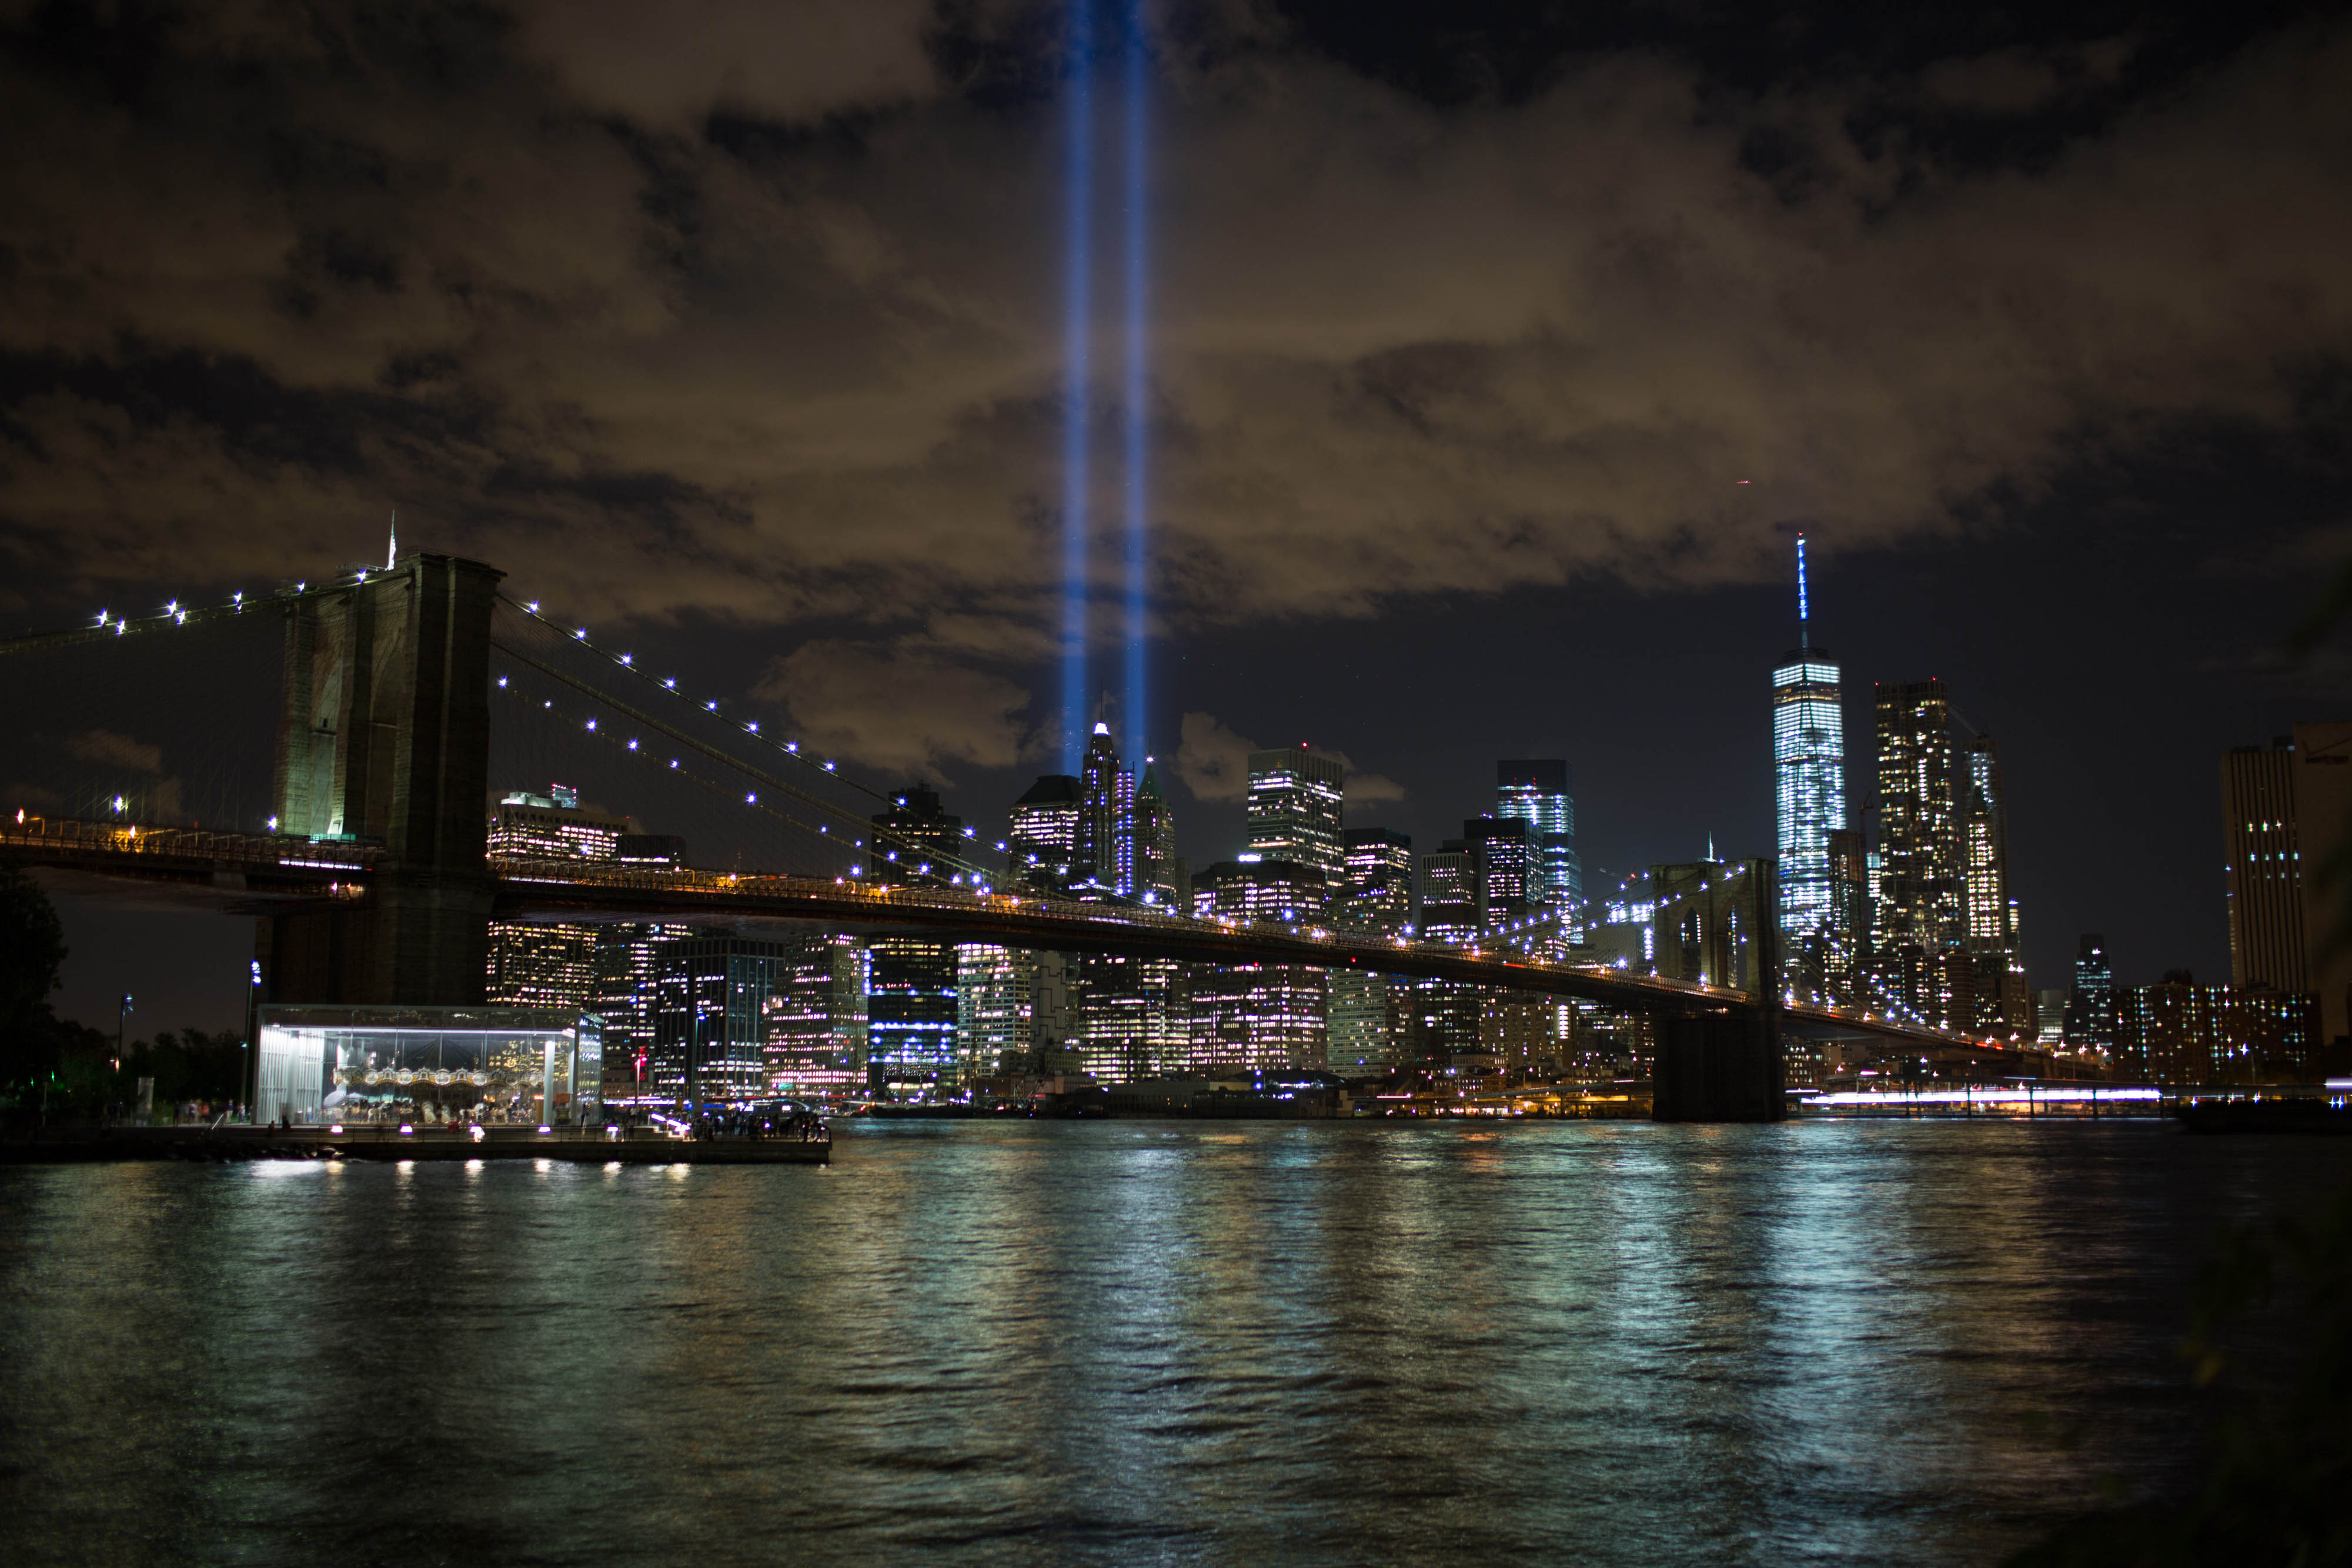 The Tribute in Light shines above lower Manhattan in this photo taken across the East River in Brooklyn. The Brooklyn Bridge is in the foreground.